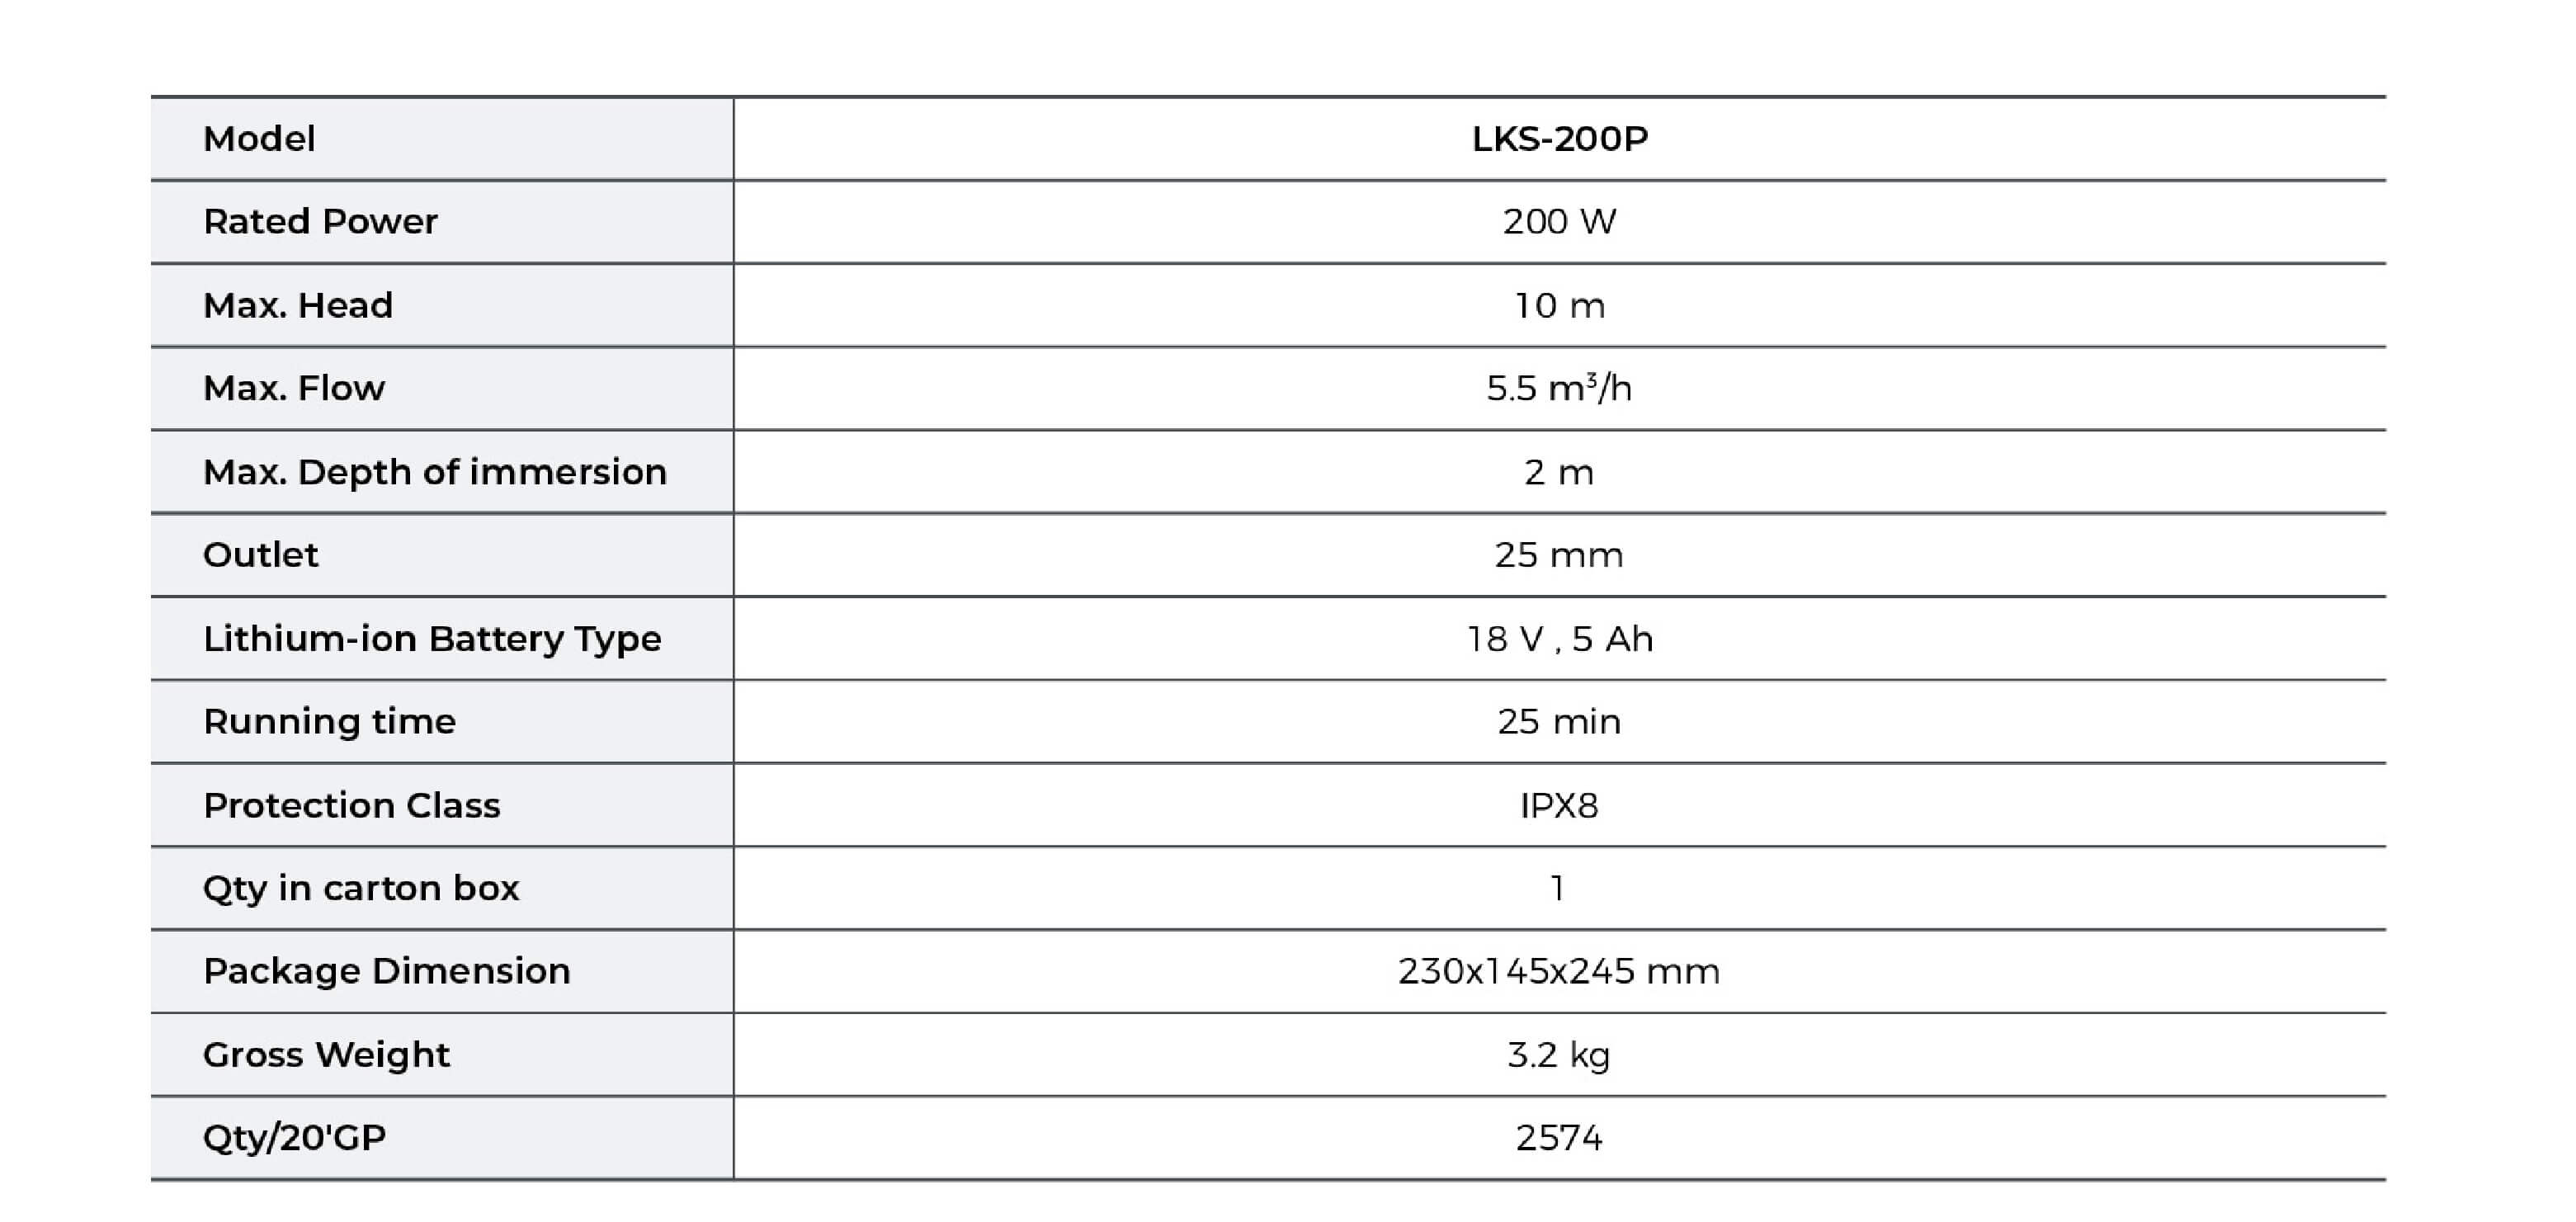 LKS-200P Lithium-ion Battery Submersible Pump Technical Data